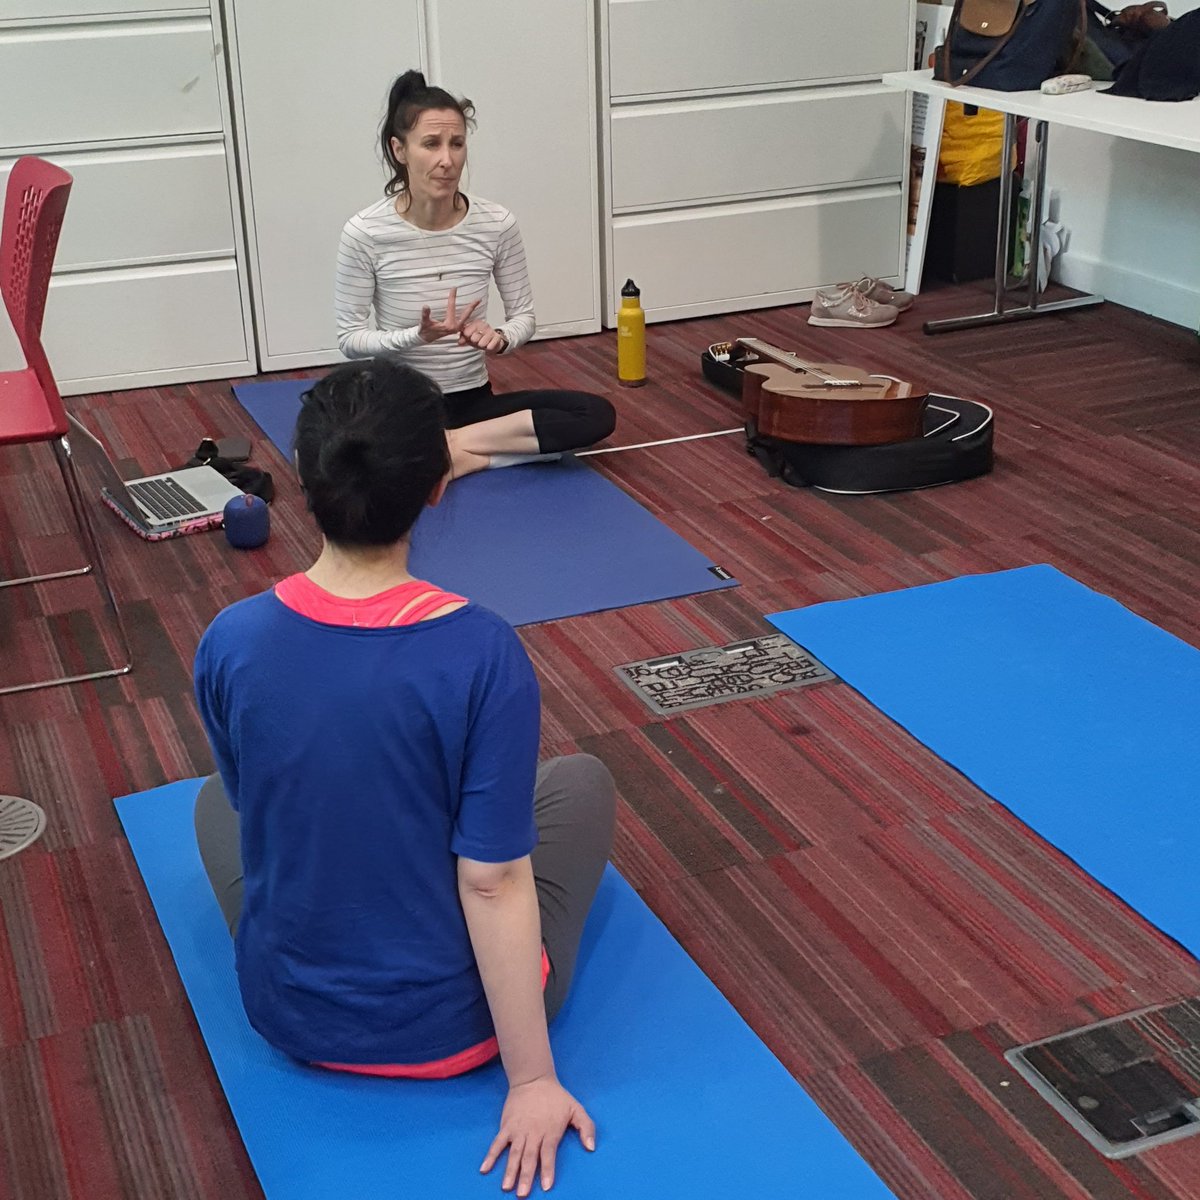 Unwind & Recharge at the #woolwichlibrary 💫⭐️ #MentalHealthAwarenessWeek we hosted yoga in the library! Find your inner peace & boost well-being. #libraries #yoga #stressrelie @GLL_UK @libsconnected @mentalhealth @Royal_Greenwich